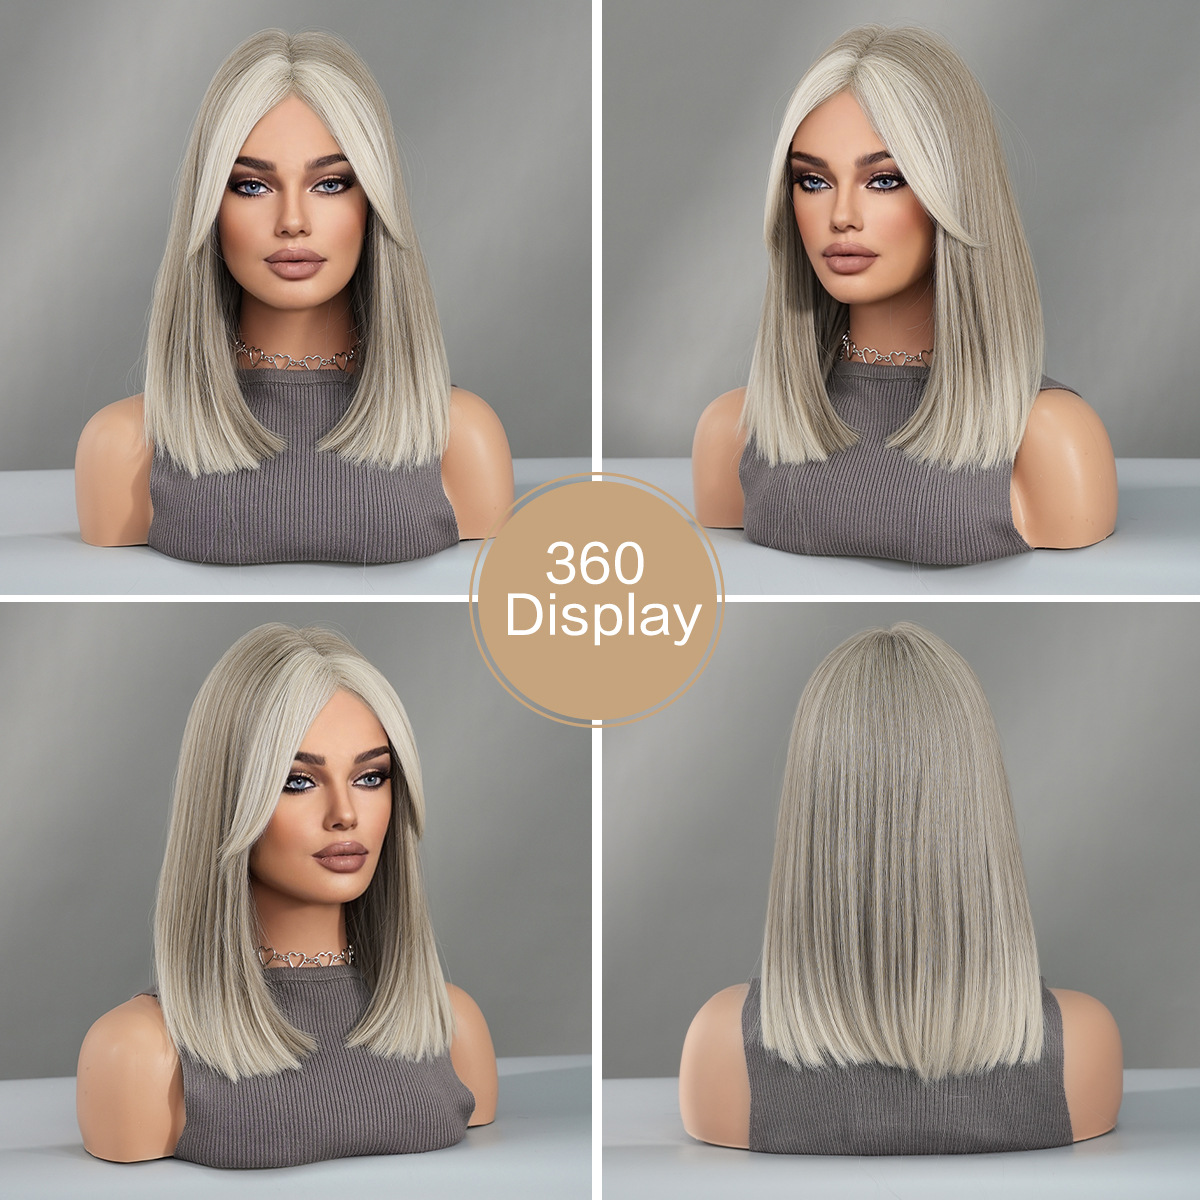 A synthetic wig in light blonde color, featuring BoBo style, short straight hair, and small T front lace